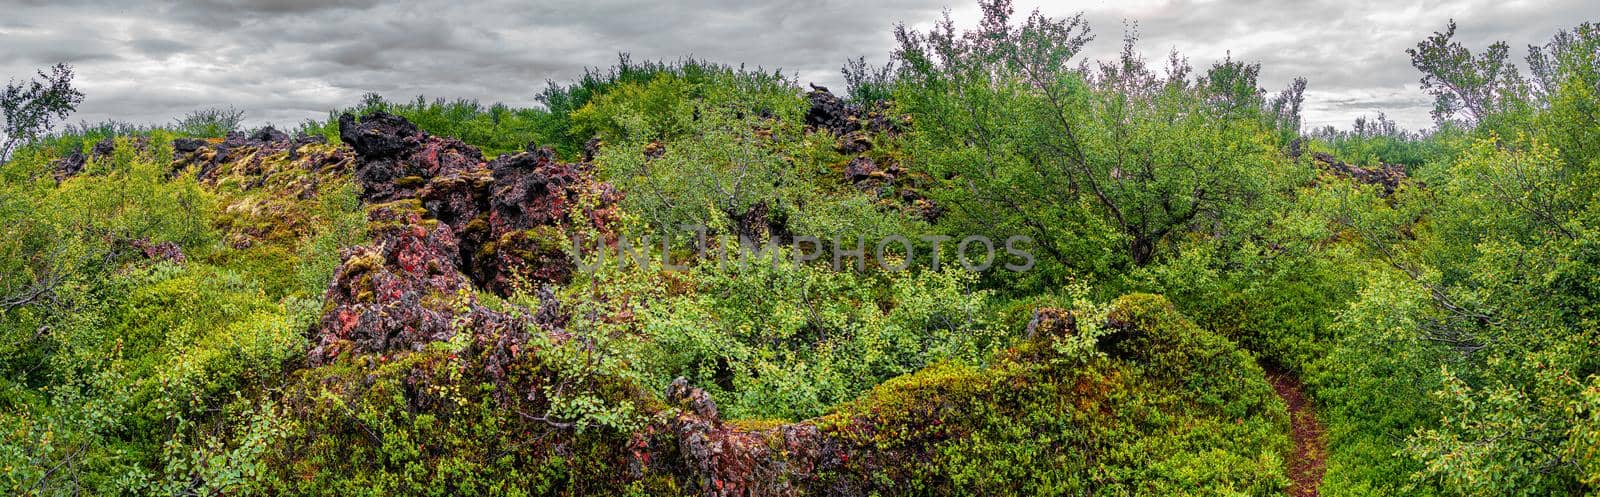 Unusual Iceland - panoramic view over a new forest grown above an old lava field with a hiking trail in Icelandic Highlands near lake Myvatn